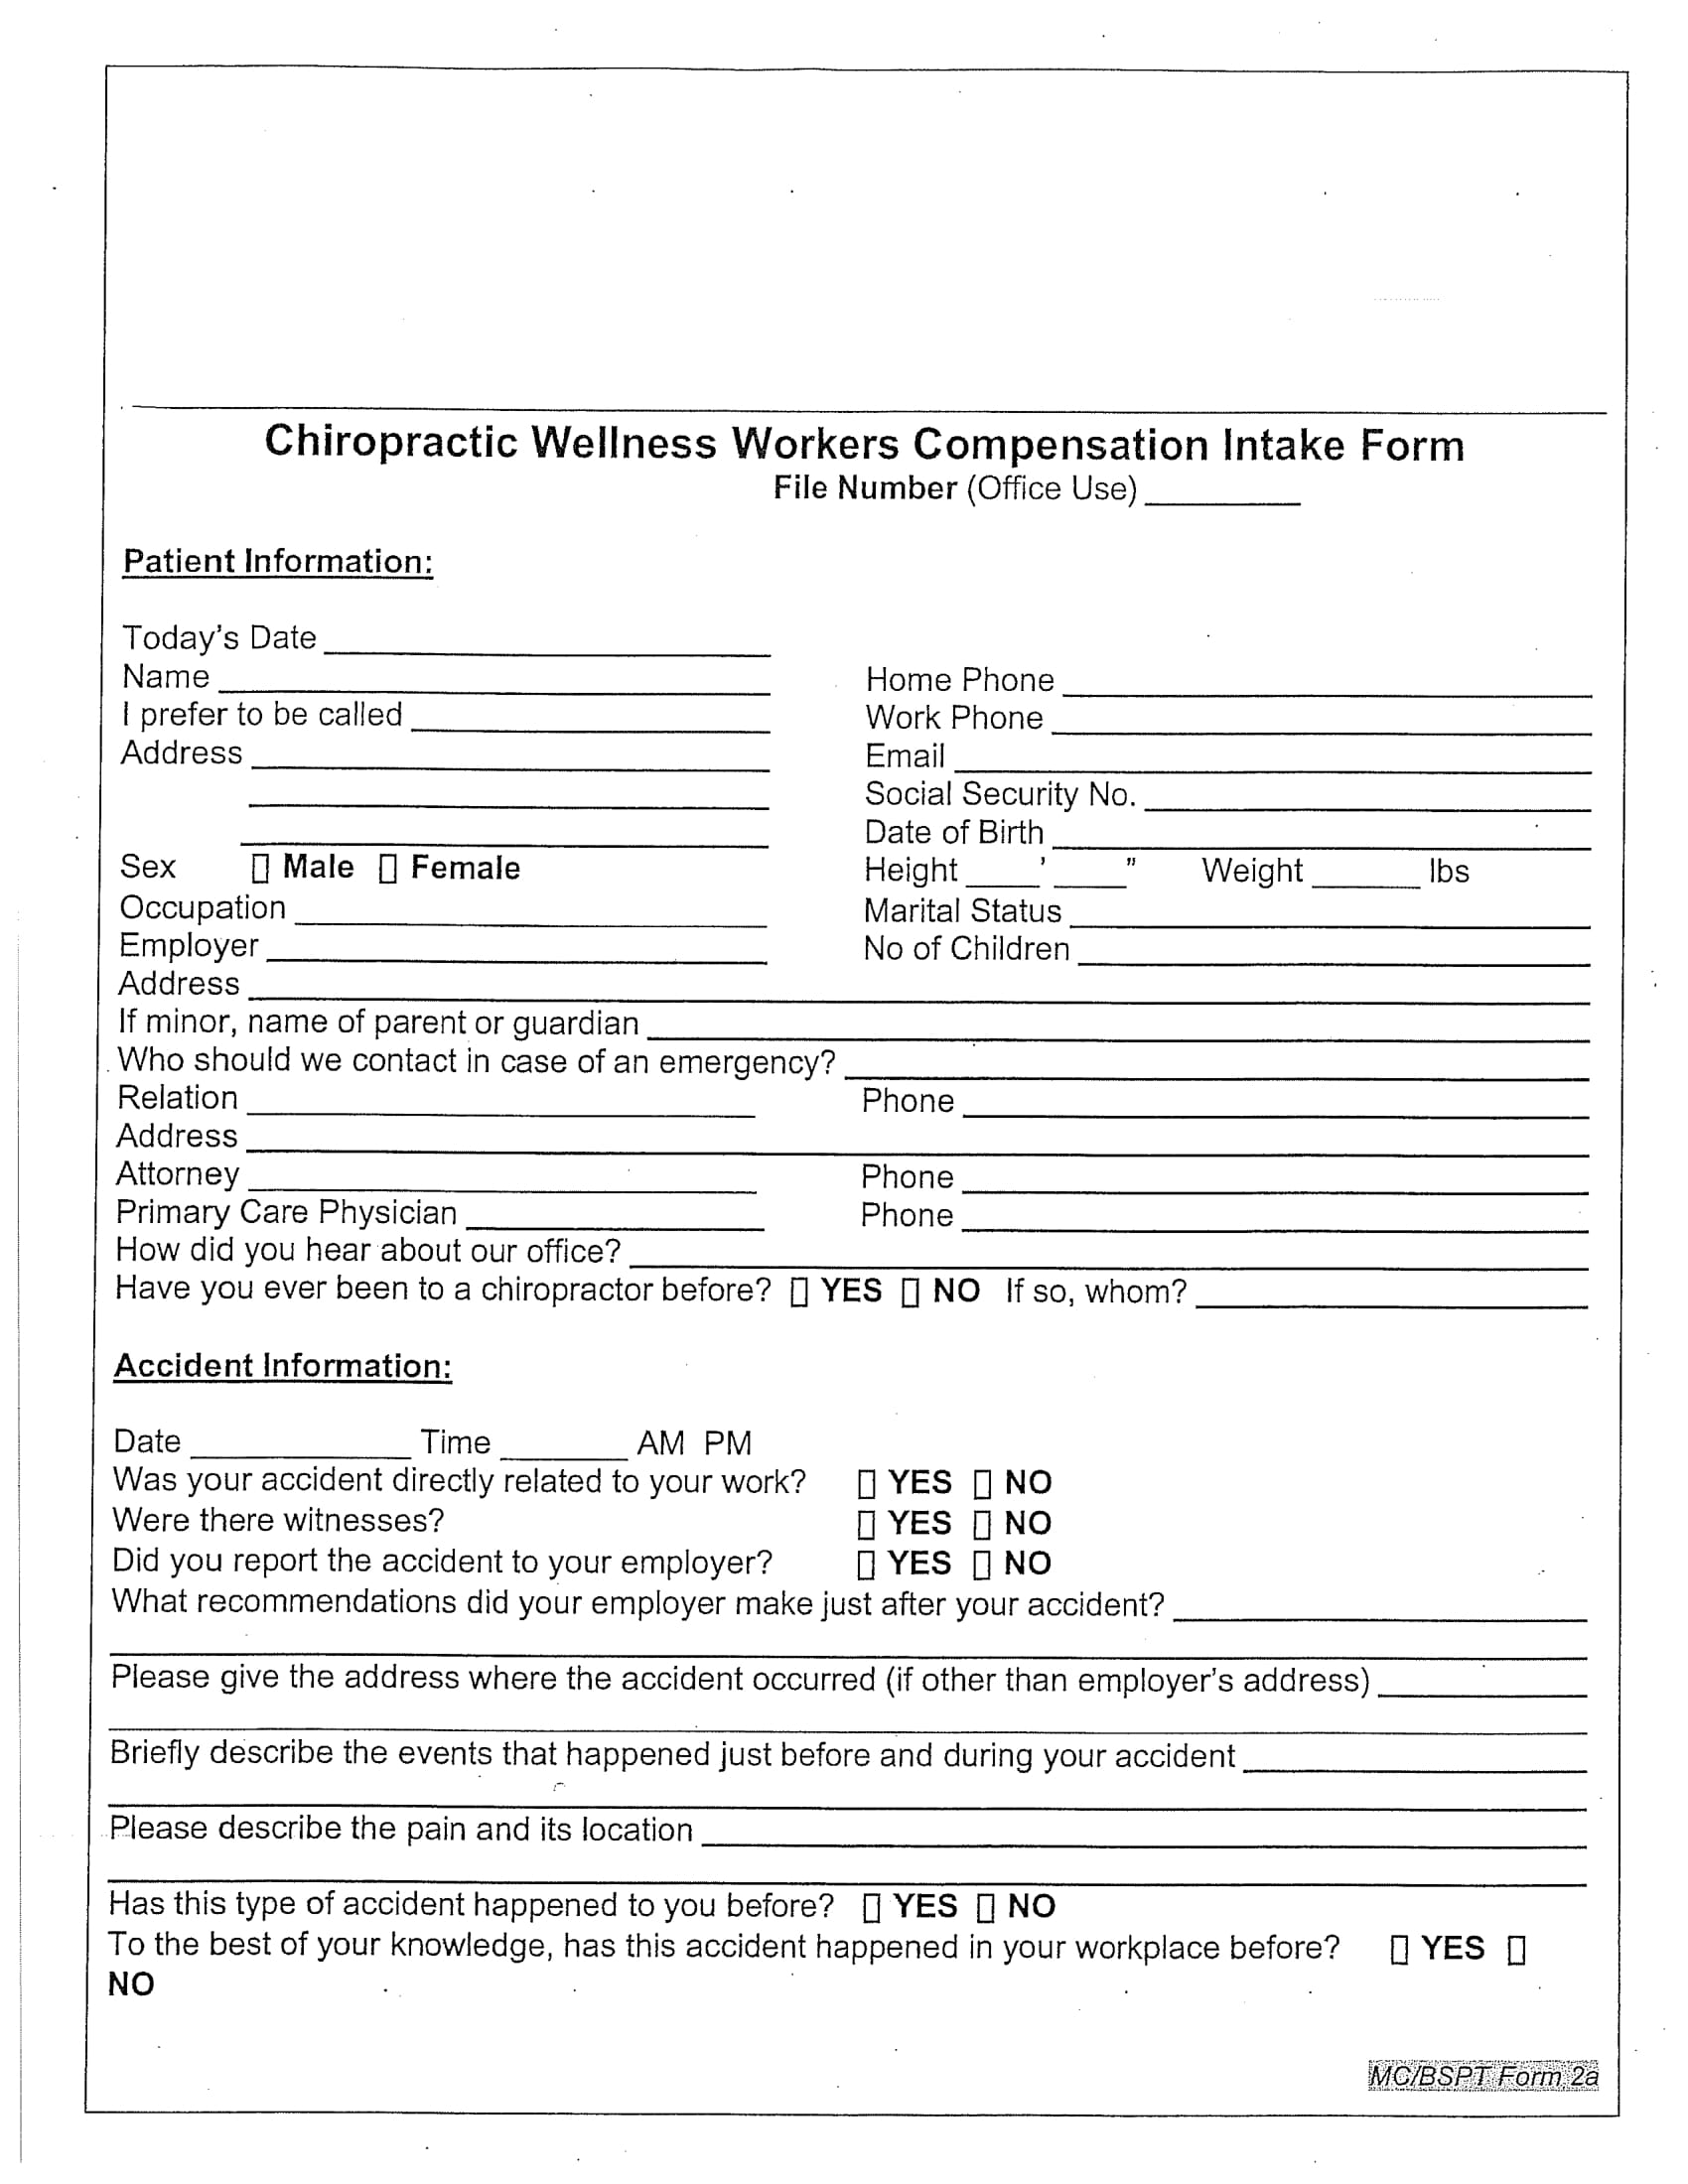 chiropractic wellness workers compensation intake form 1